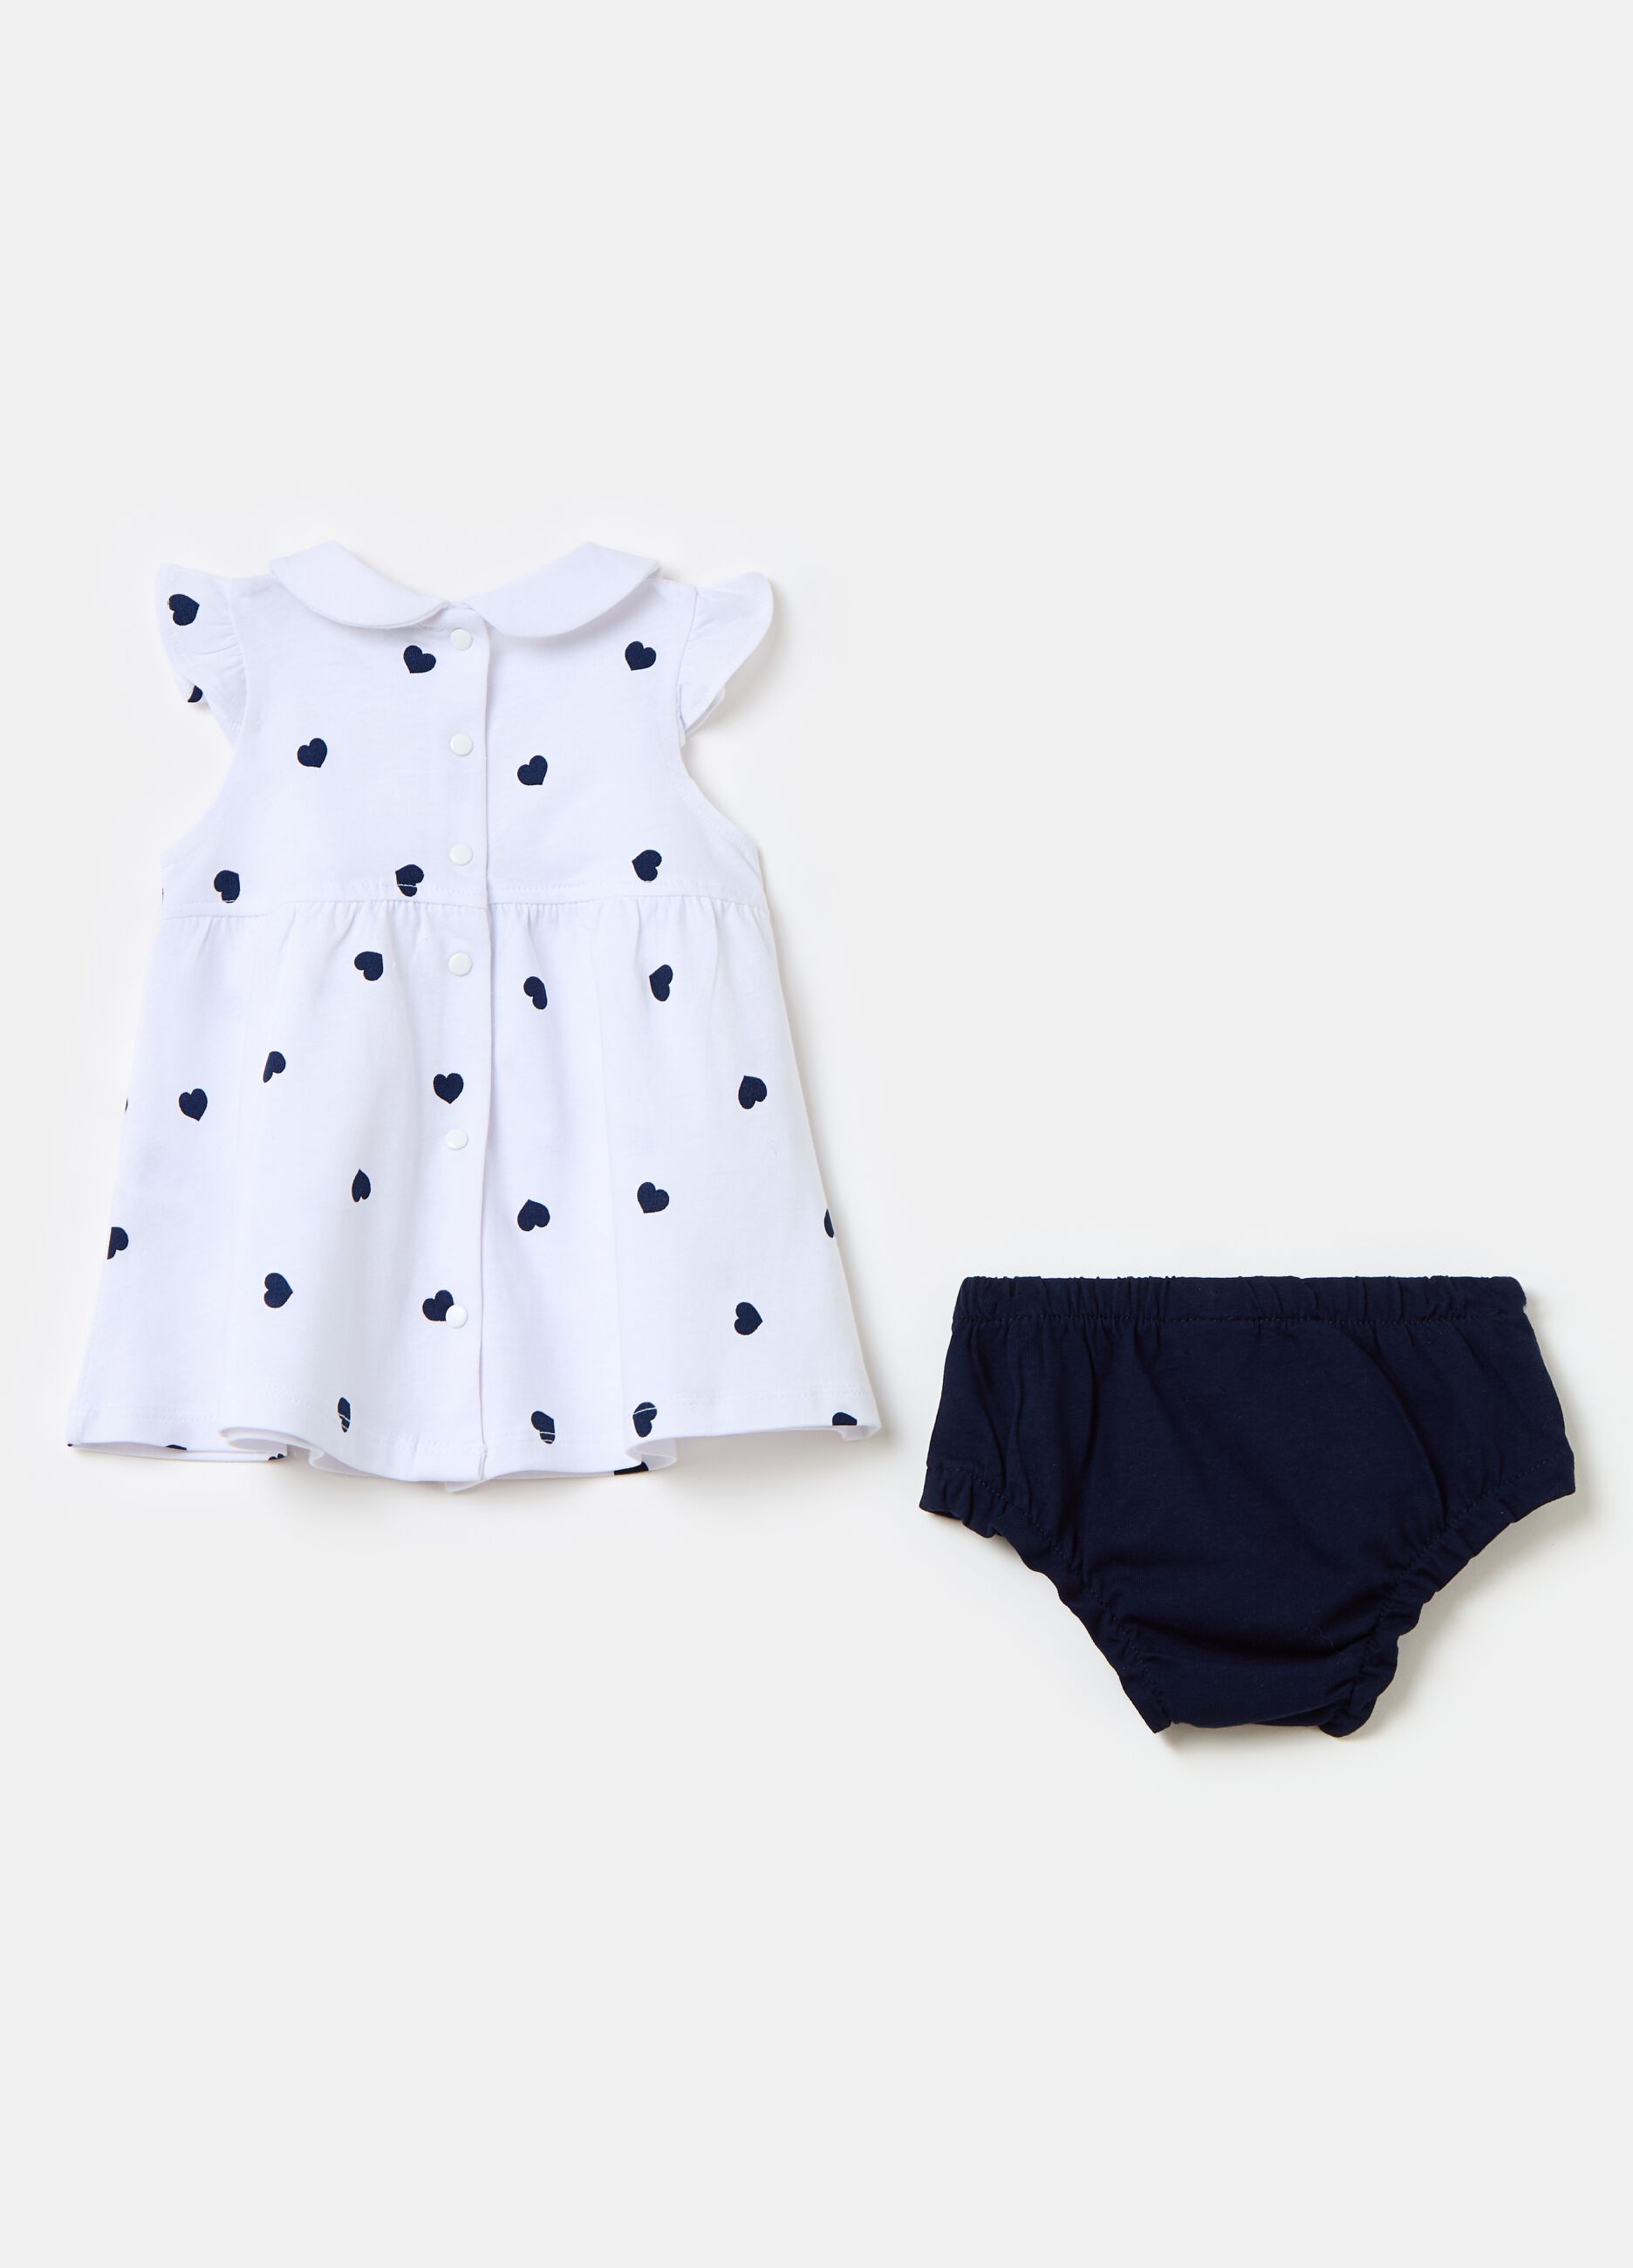 Organic cotton dress and French knickers set